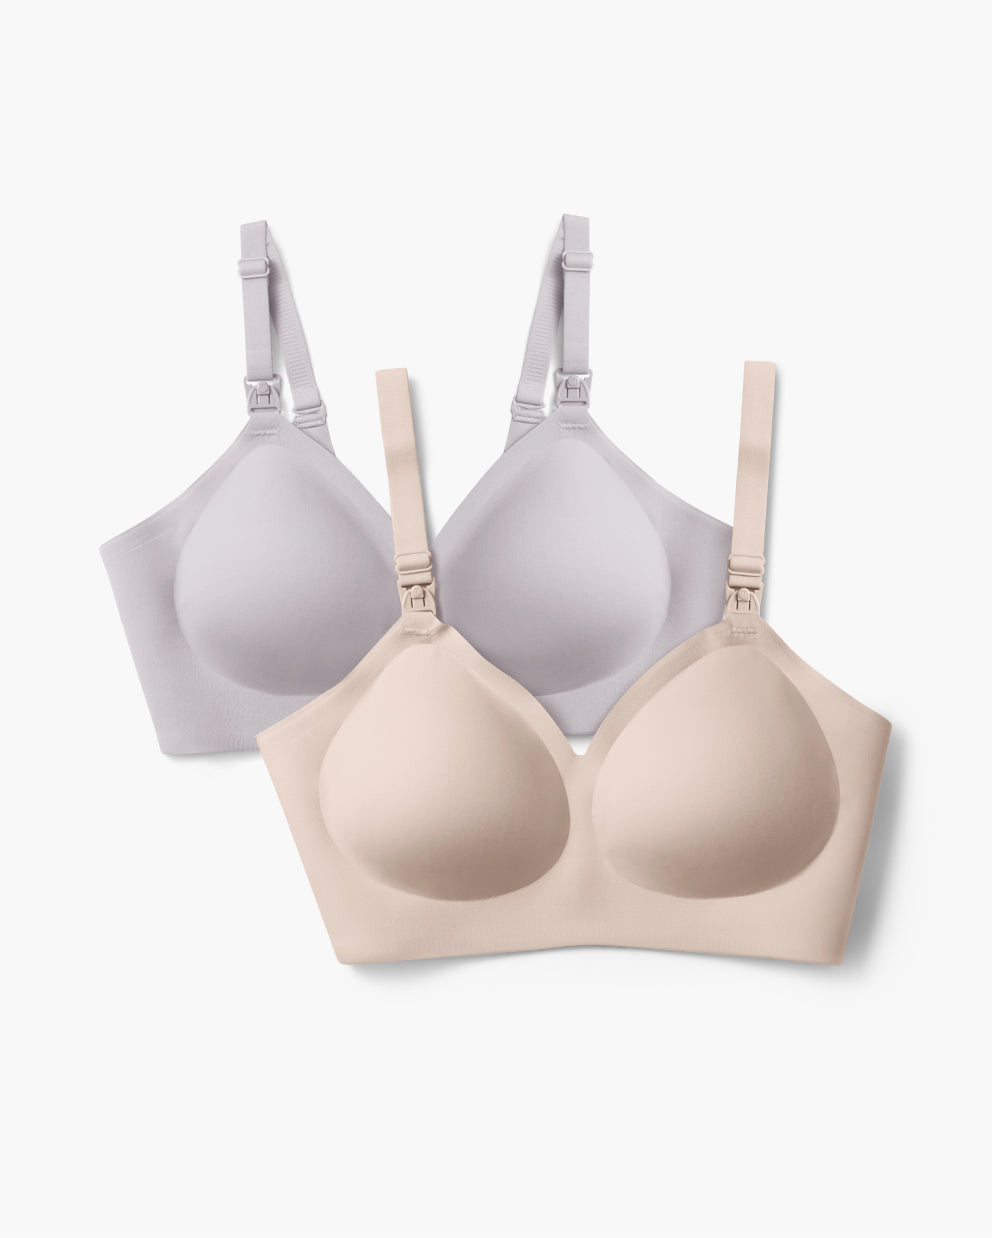 Pxiakgy bras for women Bras for Breastfeeding Upgraded Supportive